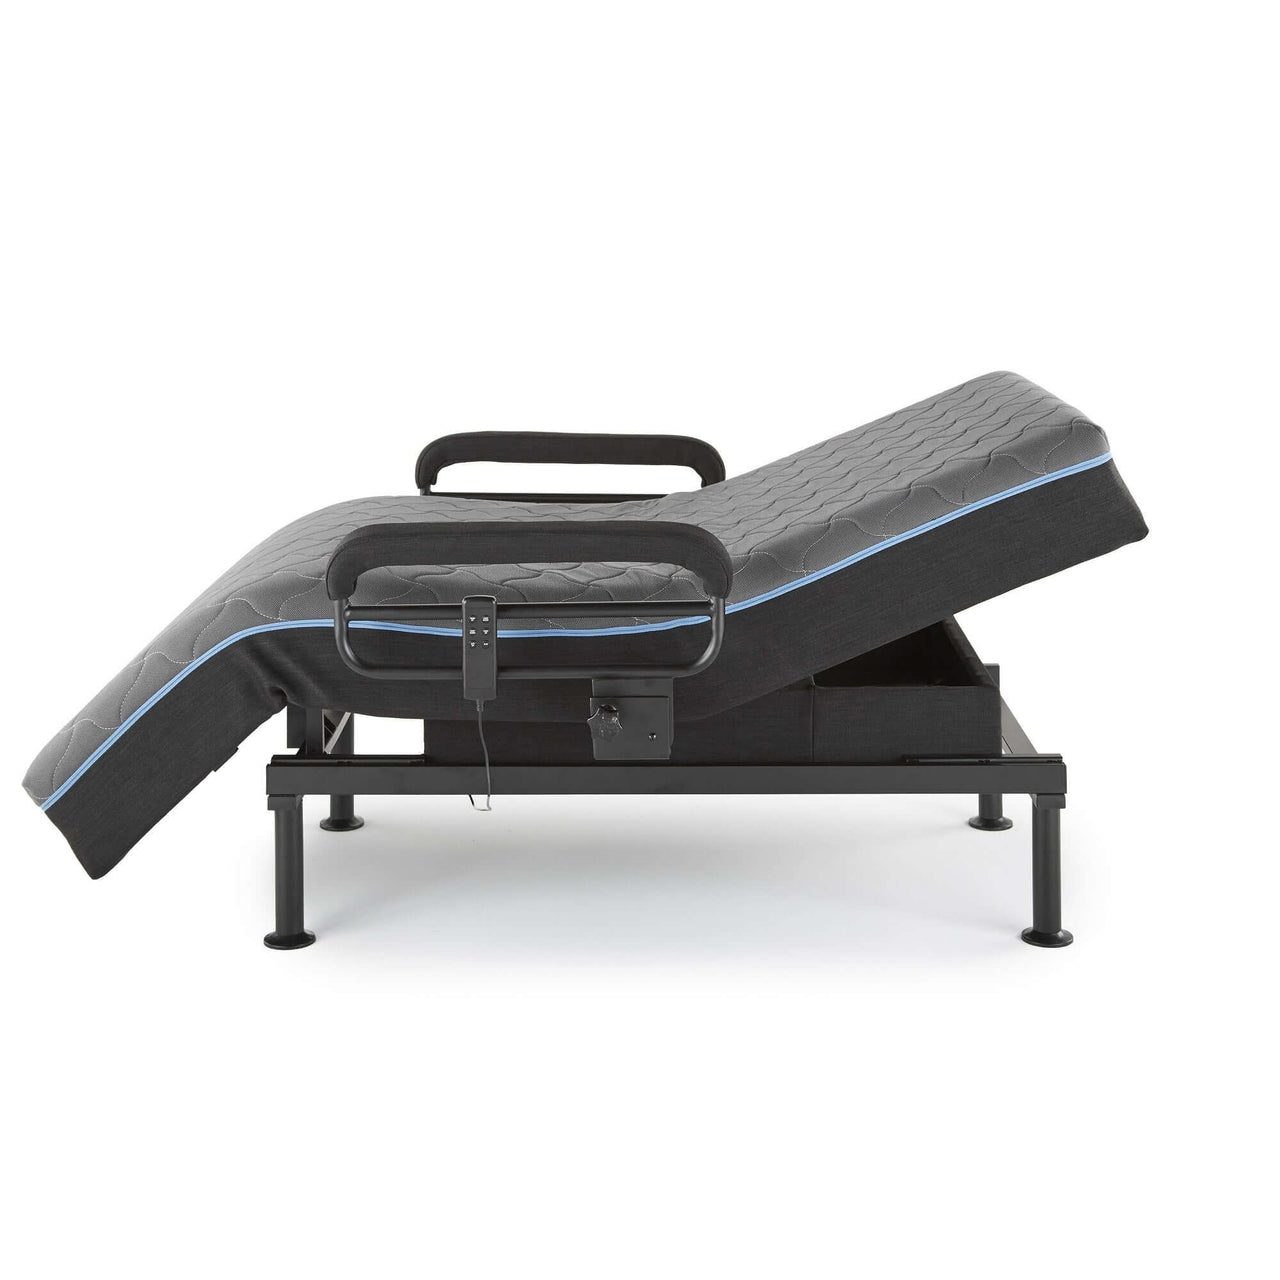 SleepLab Bed All-in-One High-Low Adjustable Bed and Lift Chair